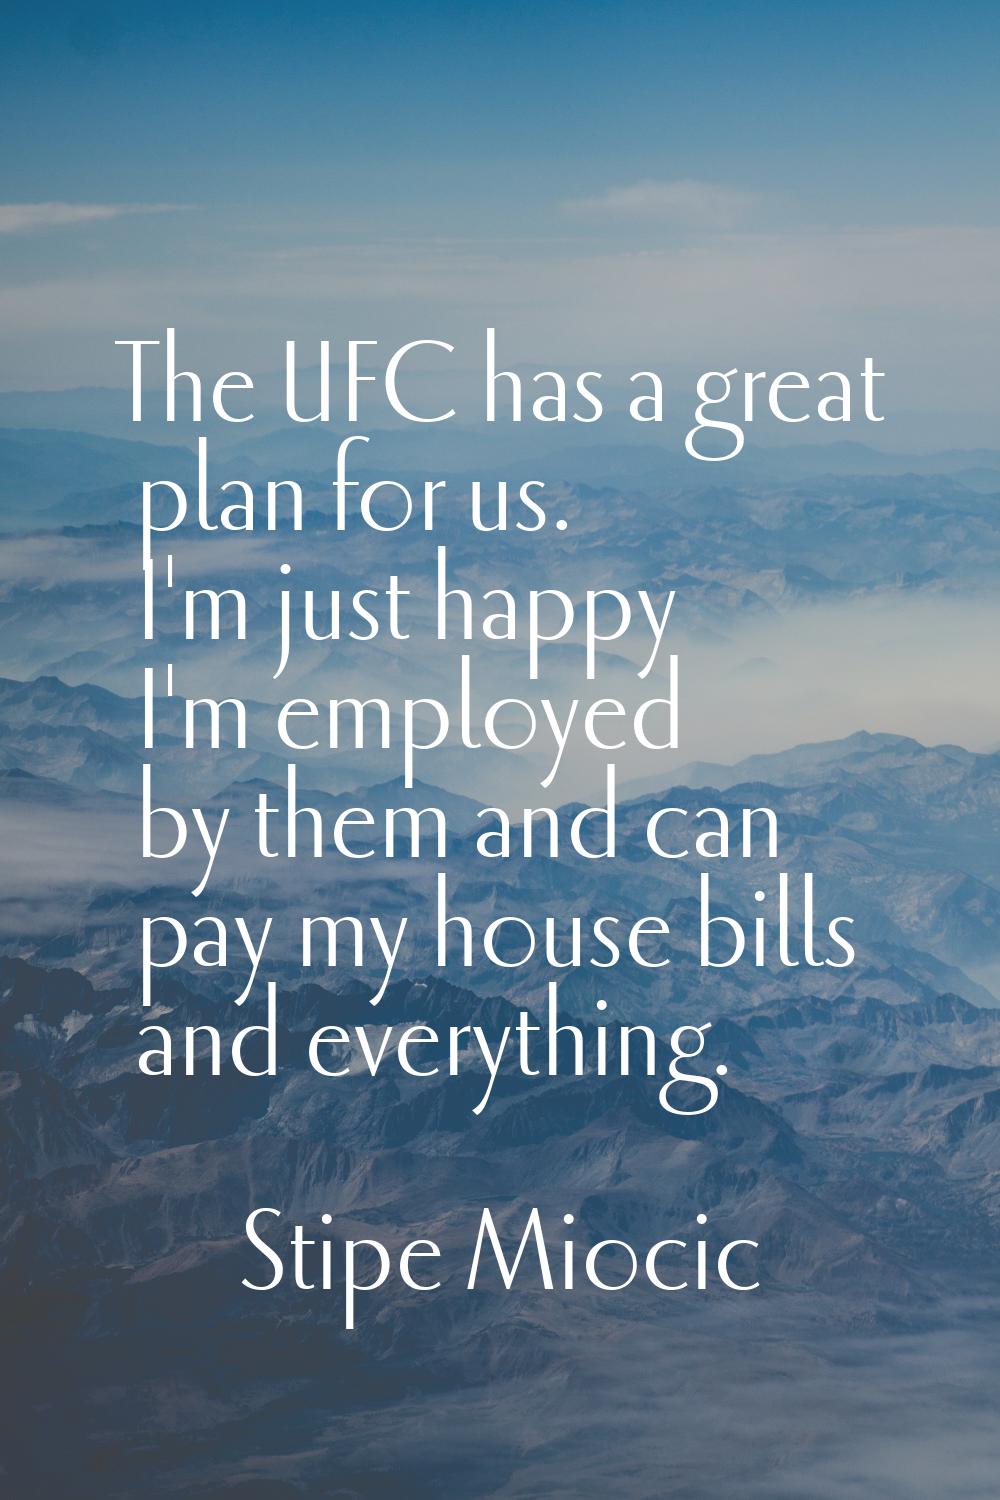 The UFC has a great plan for us. I'm just happy I'm employed by them and can pay my house bills and